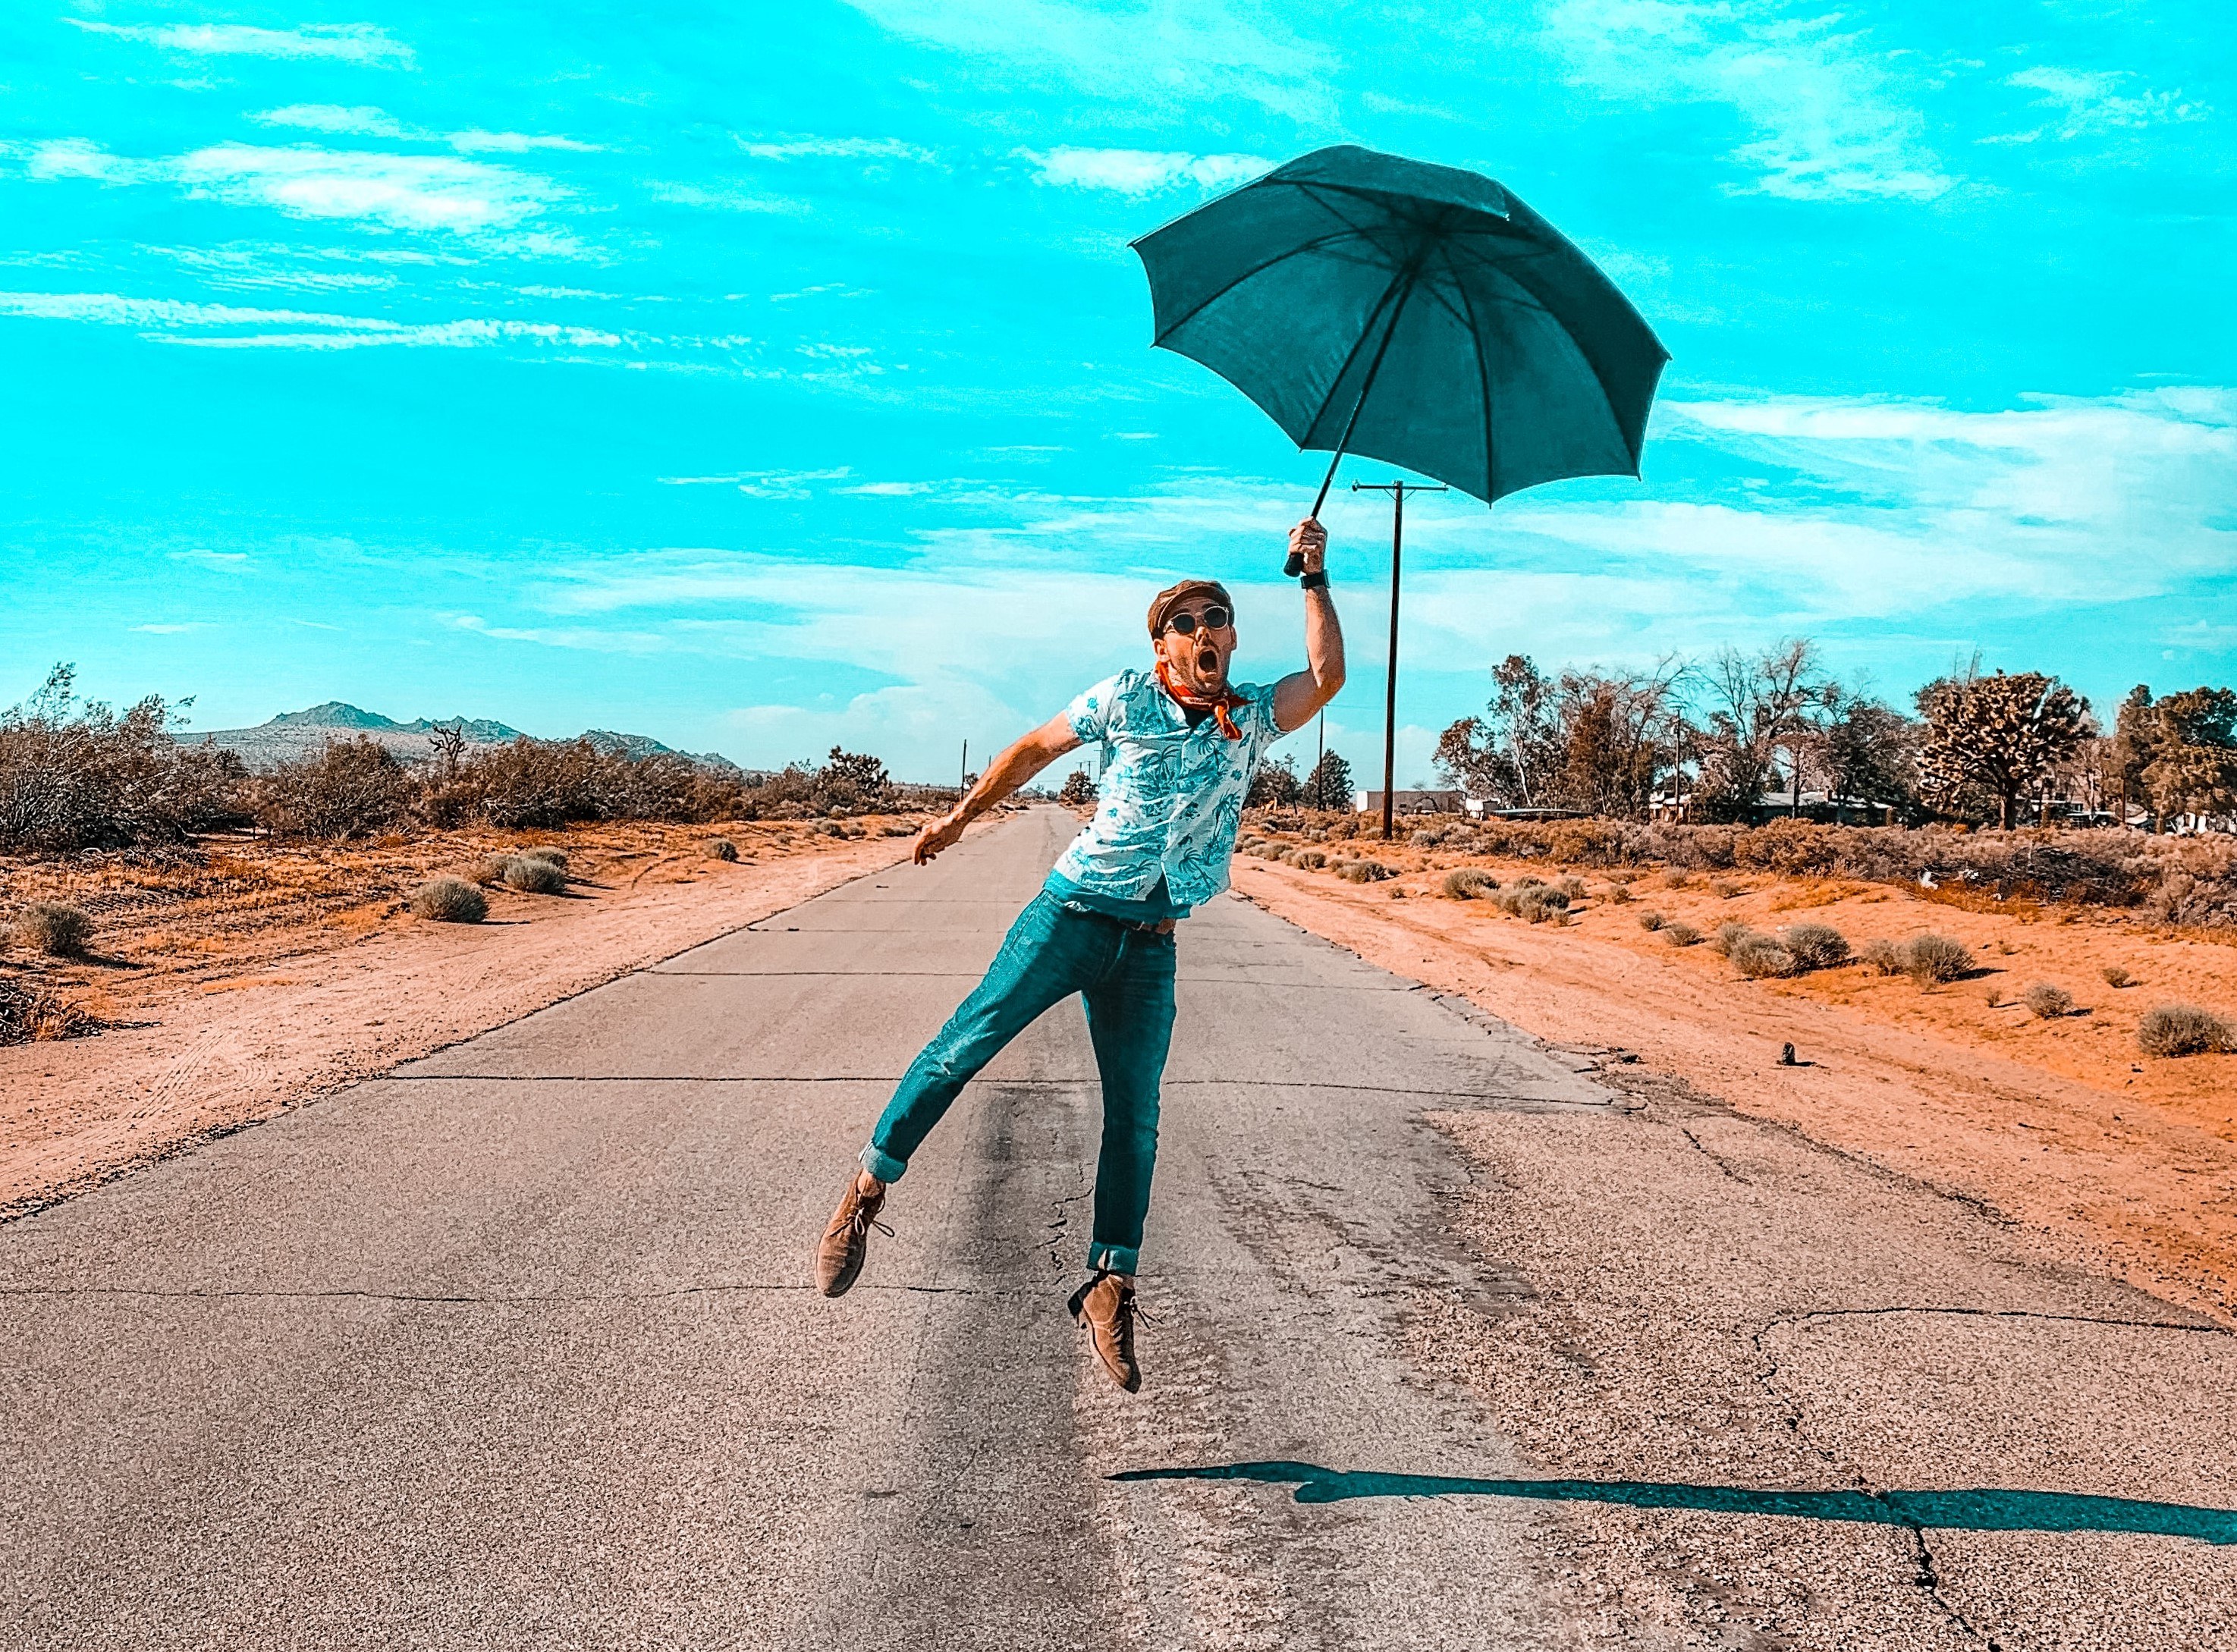 A happy man holding an umbrella and jumping in the middle of a road.